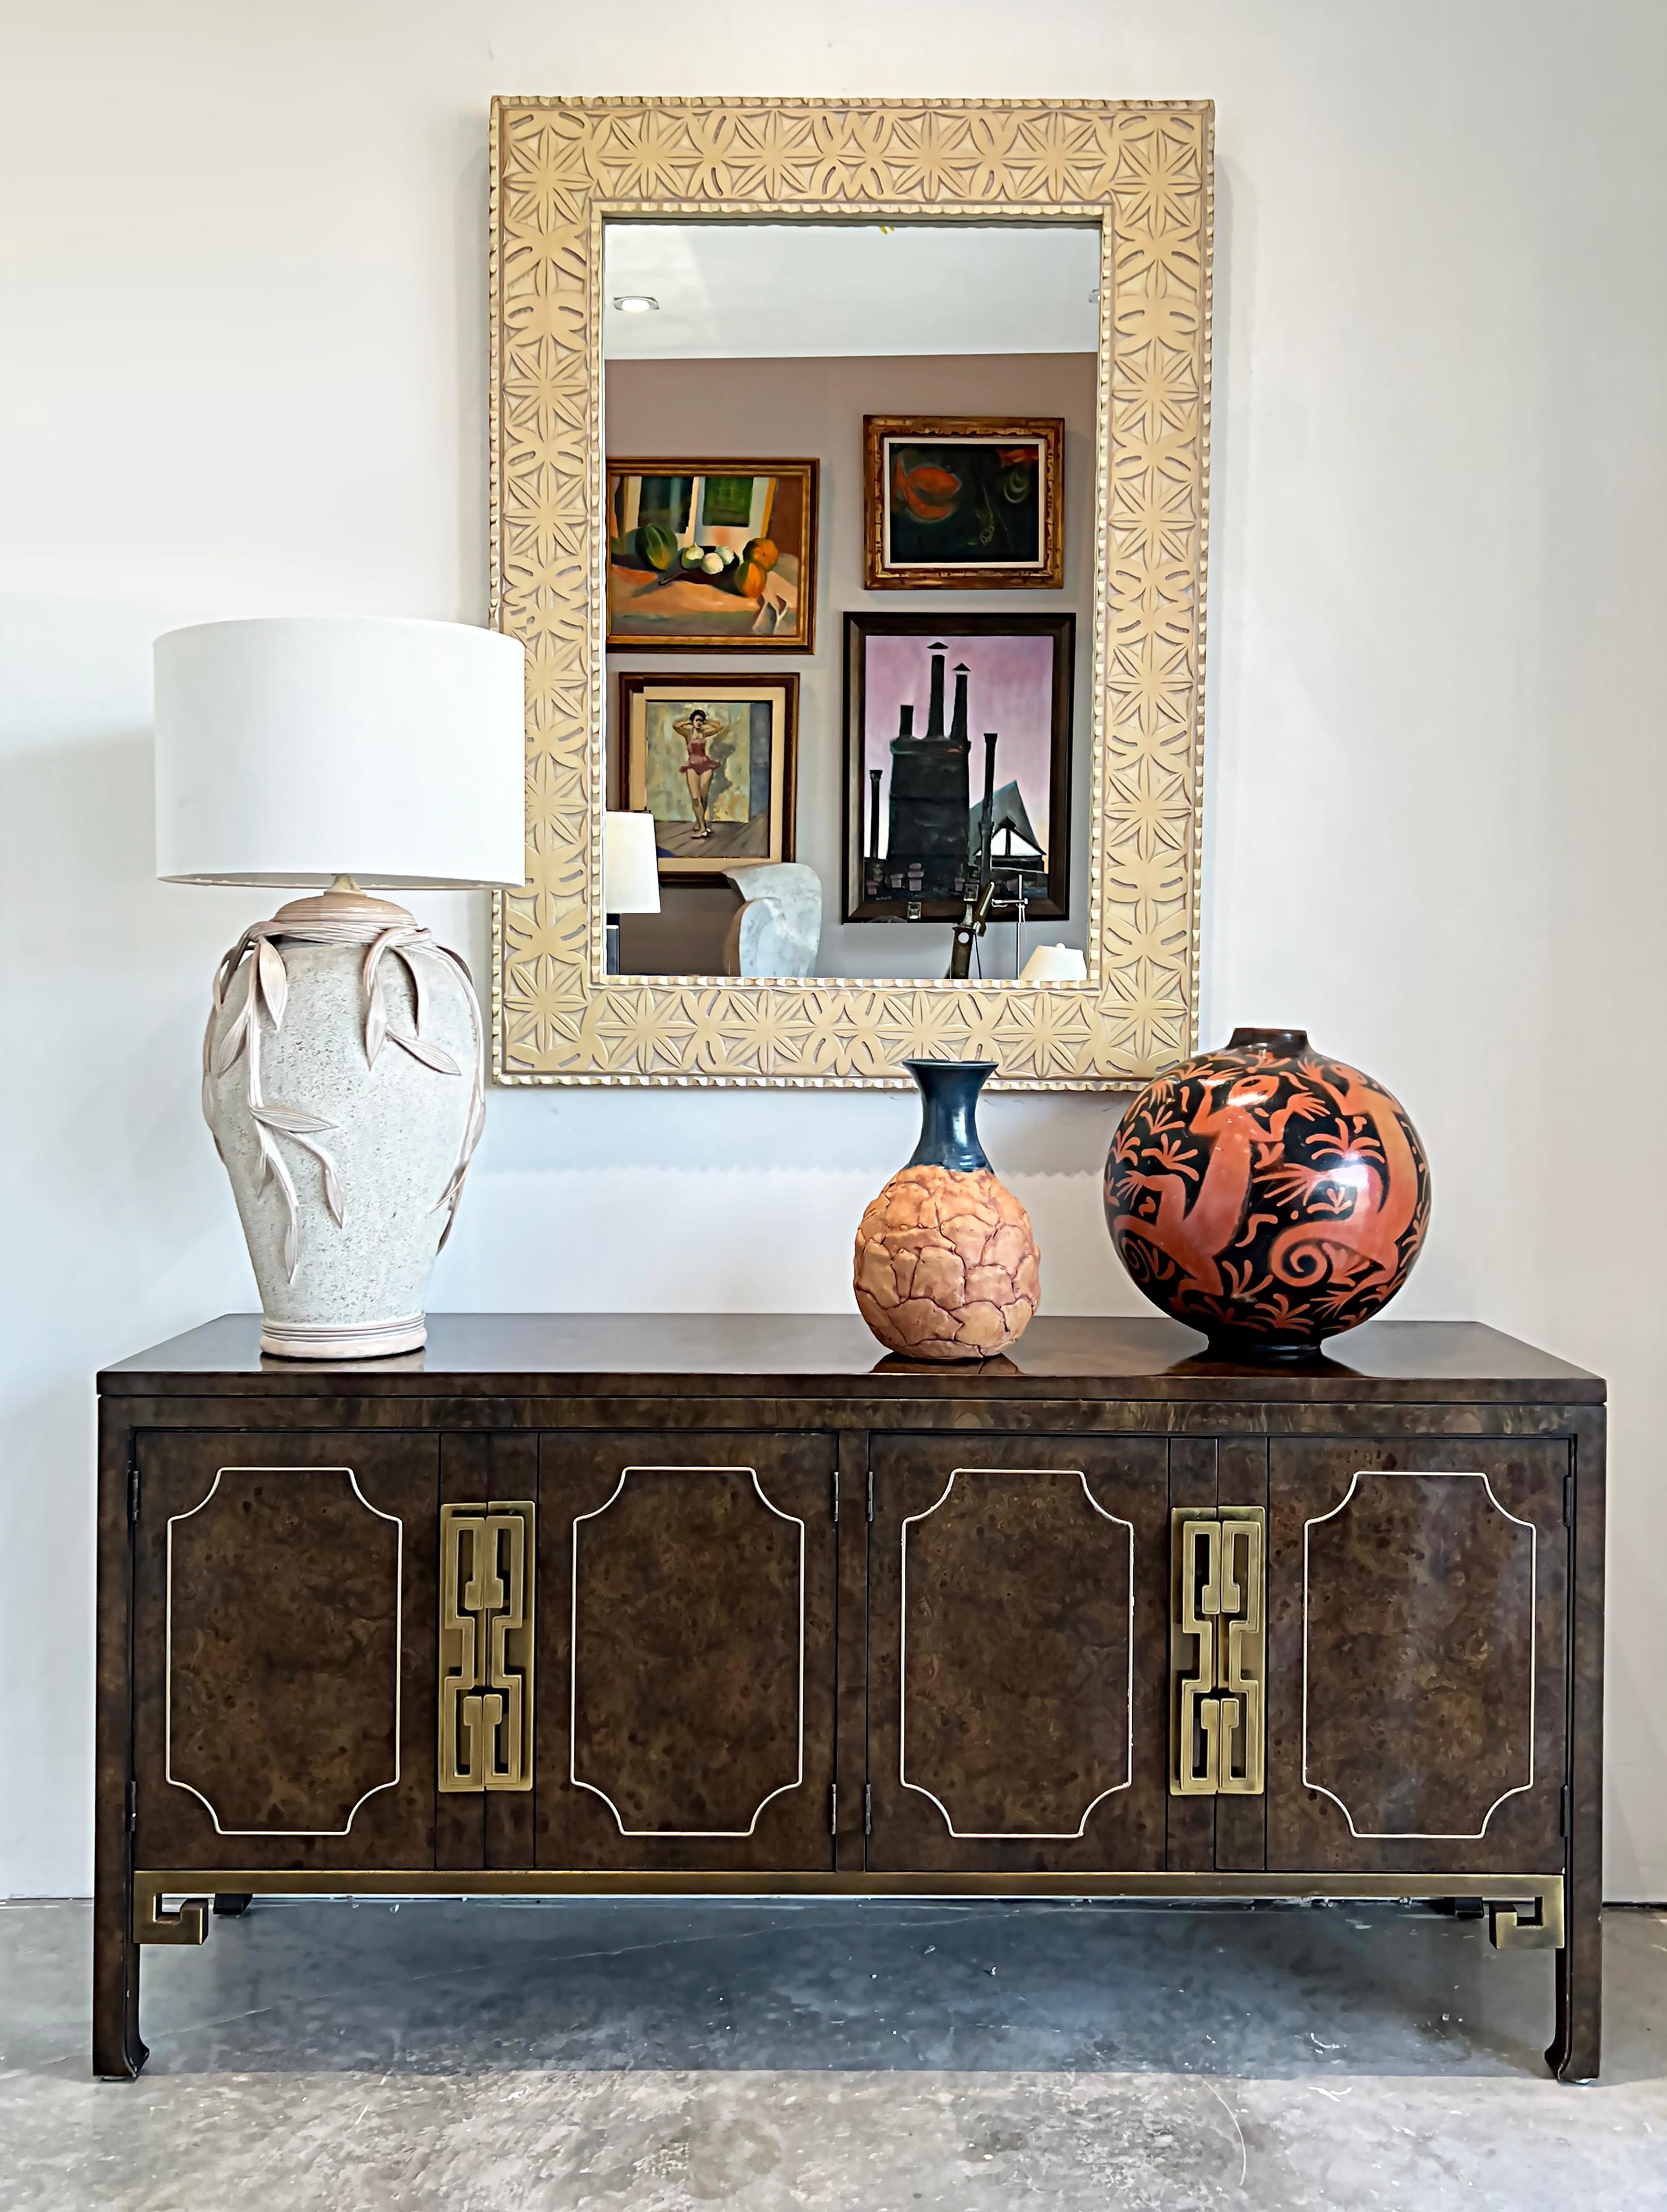 Mastercraft Hollywood Regency burl wood, Brass Credenza Sideboard

Offered for sale is a 1970s Mastercraft credenza in Carpathian elm burlwood with the original overscale brass Greek Key handles and mounted detail trim. This iconic cabinet's